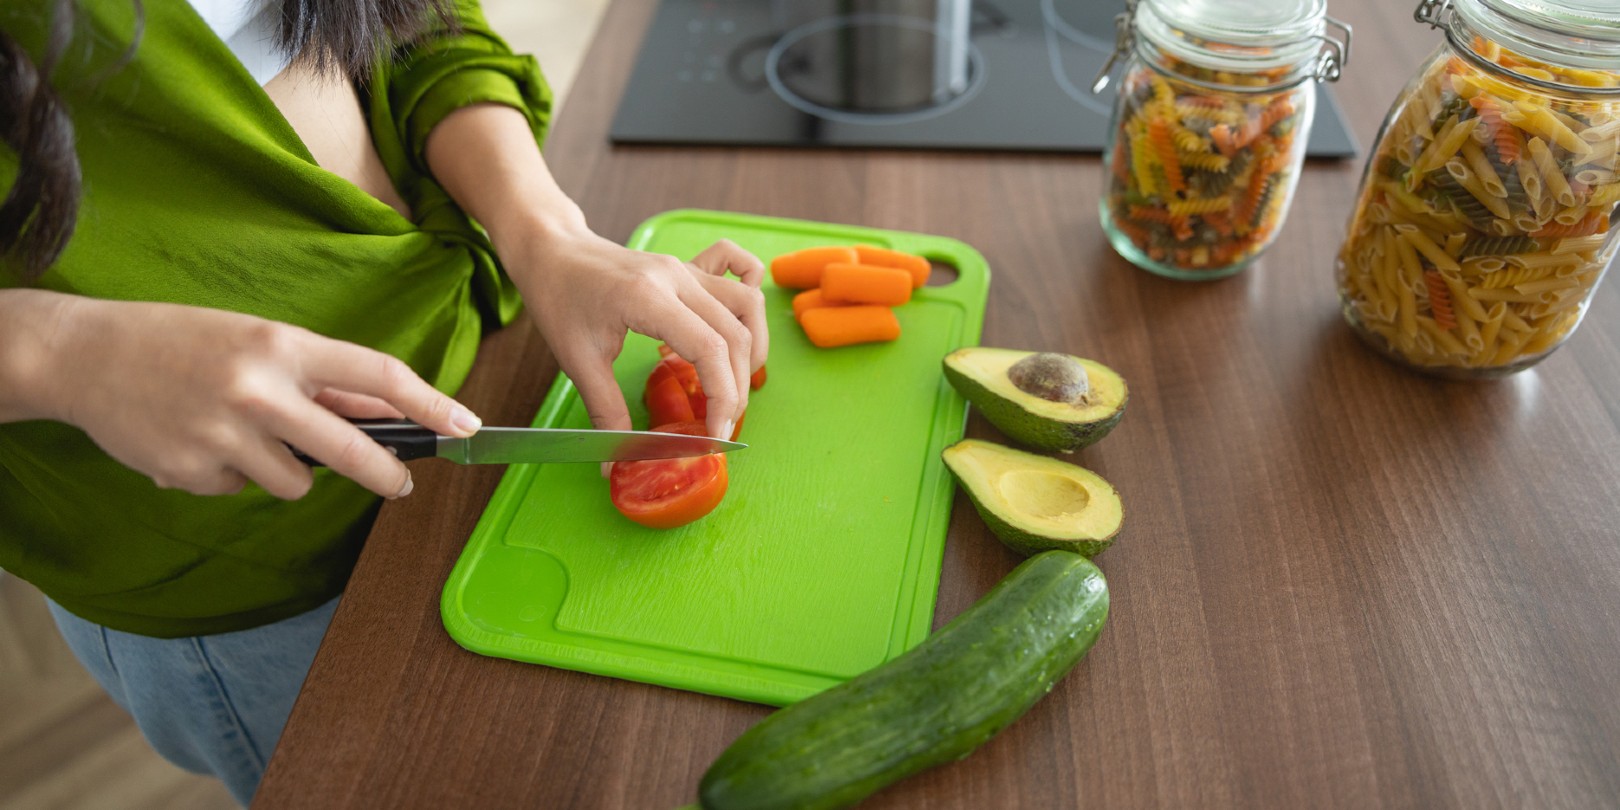 Are Plastic Cutting Boards Safe? - Cuisine at Home Guides